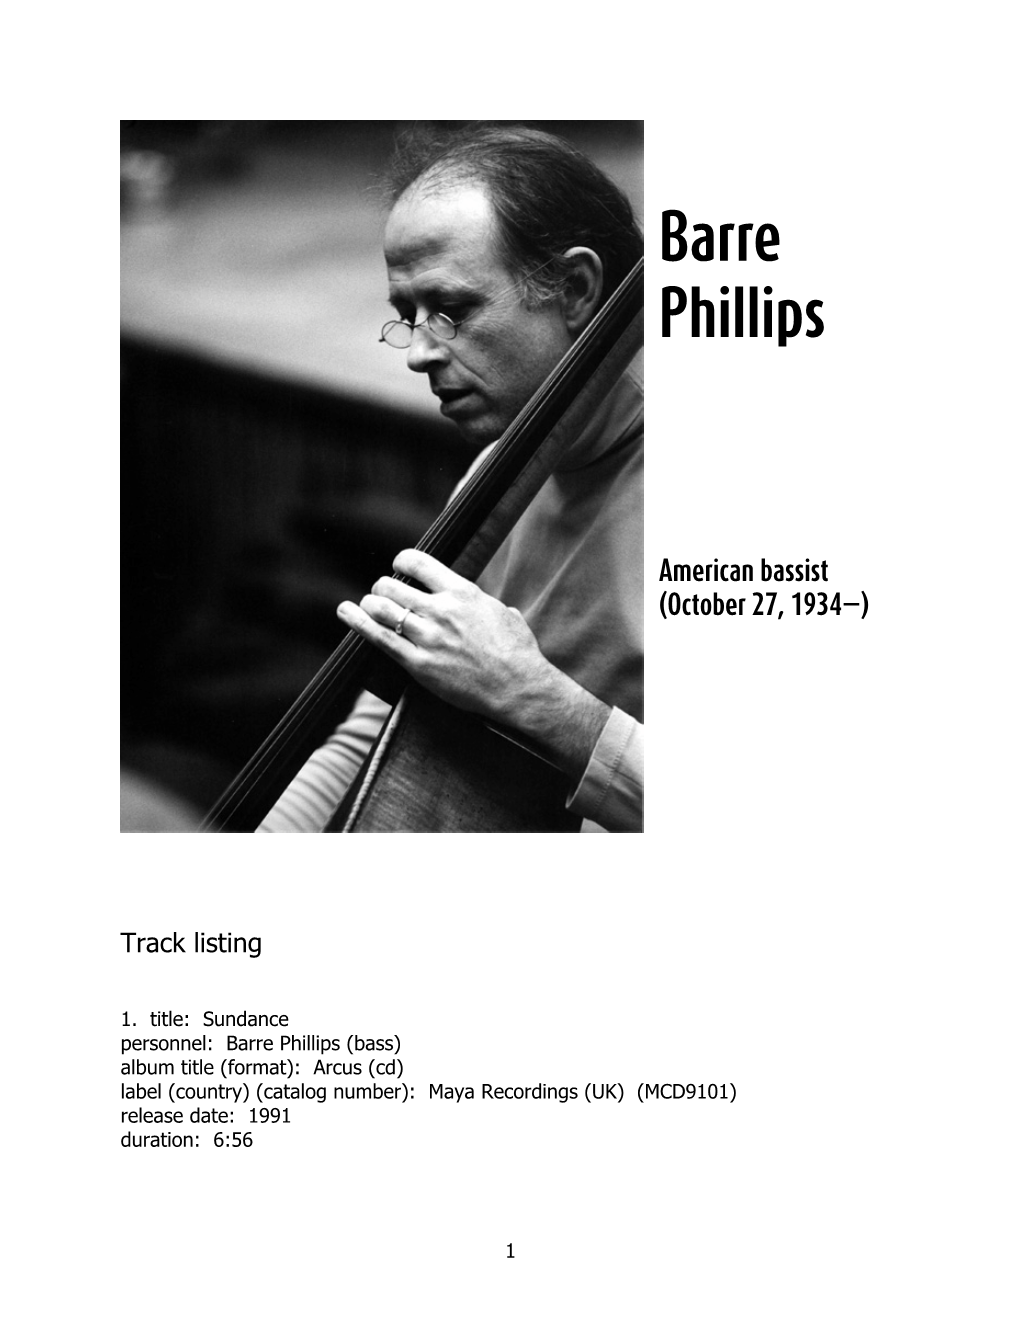 Barre Phillips (Bass) Album Title (Format): Arcus (Cd) Label (Country) (Catalog Number): Maya Recordings (UK) (MCD9101) Release Date: 1991 Duration: 6:56